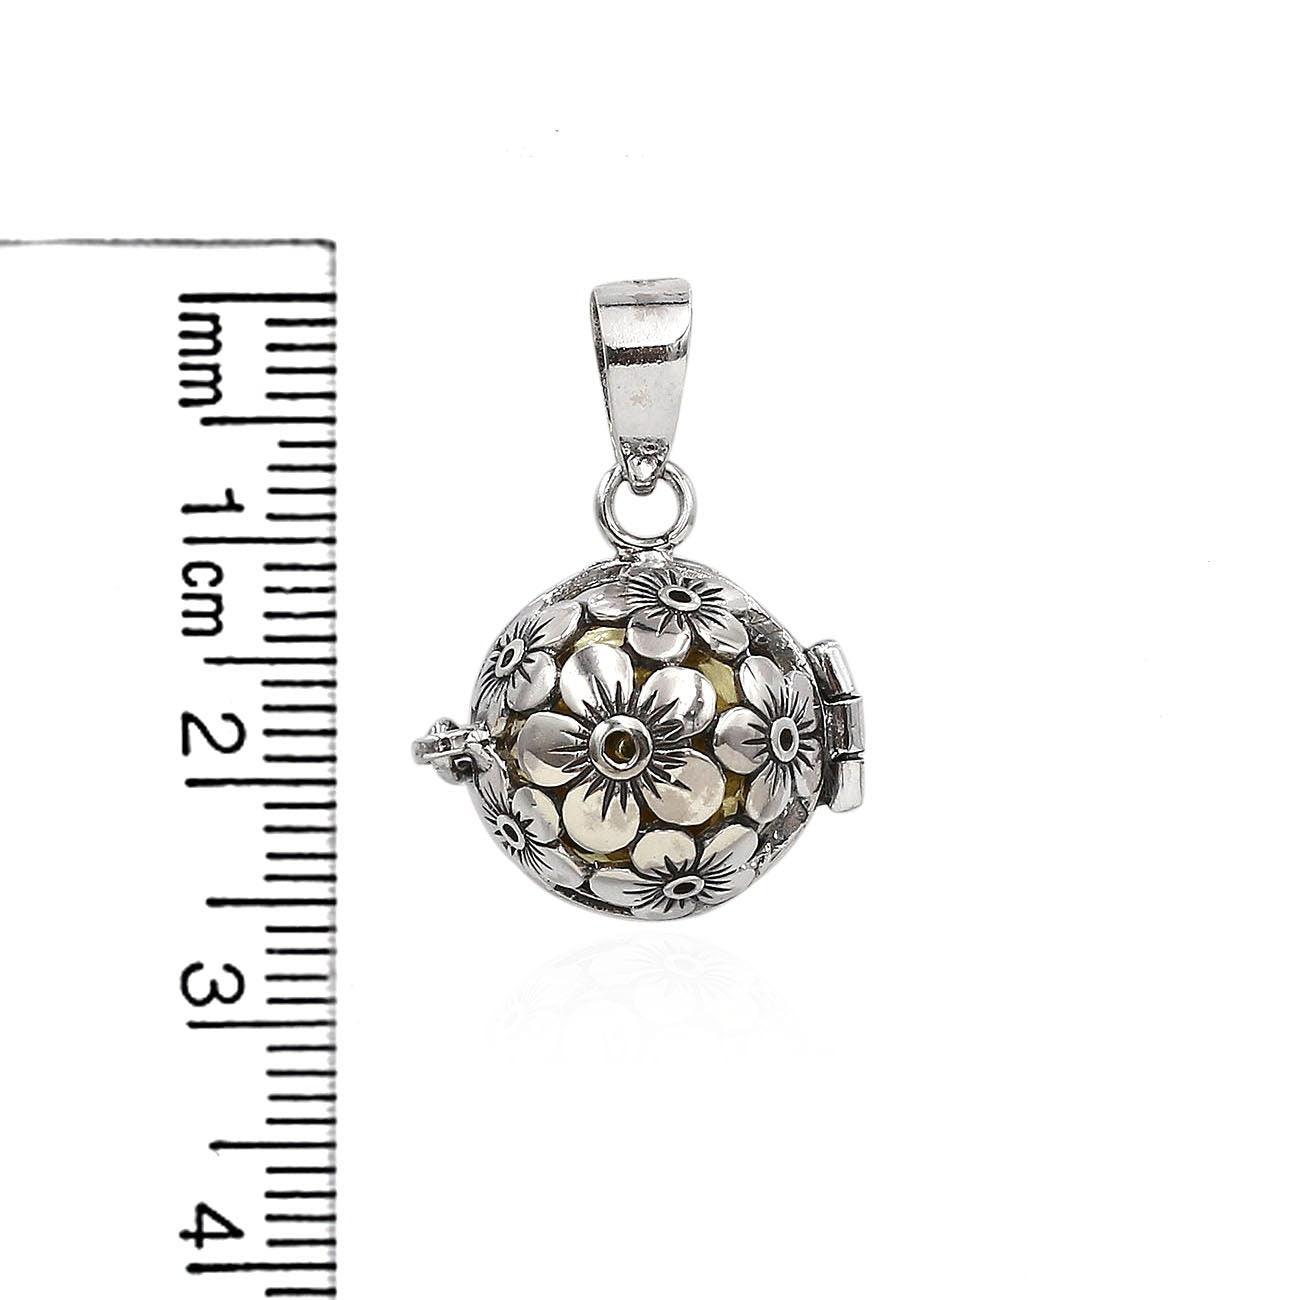 Floral Design Harmony Ball Pendant, Chime Ball, Angel Caller, Bola Necklace Pendant in 925 Sterling Silver with Chain - 2.5 Cm - Inspiring Jewellery